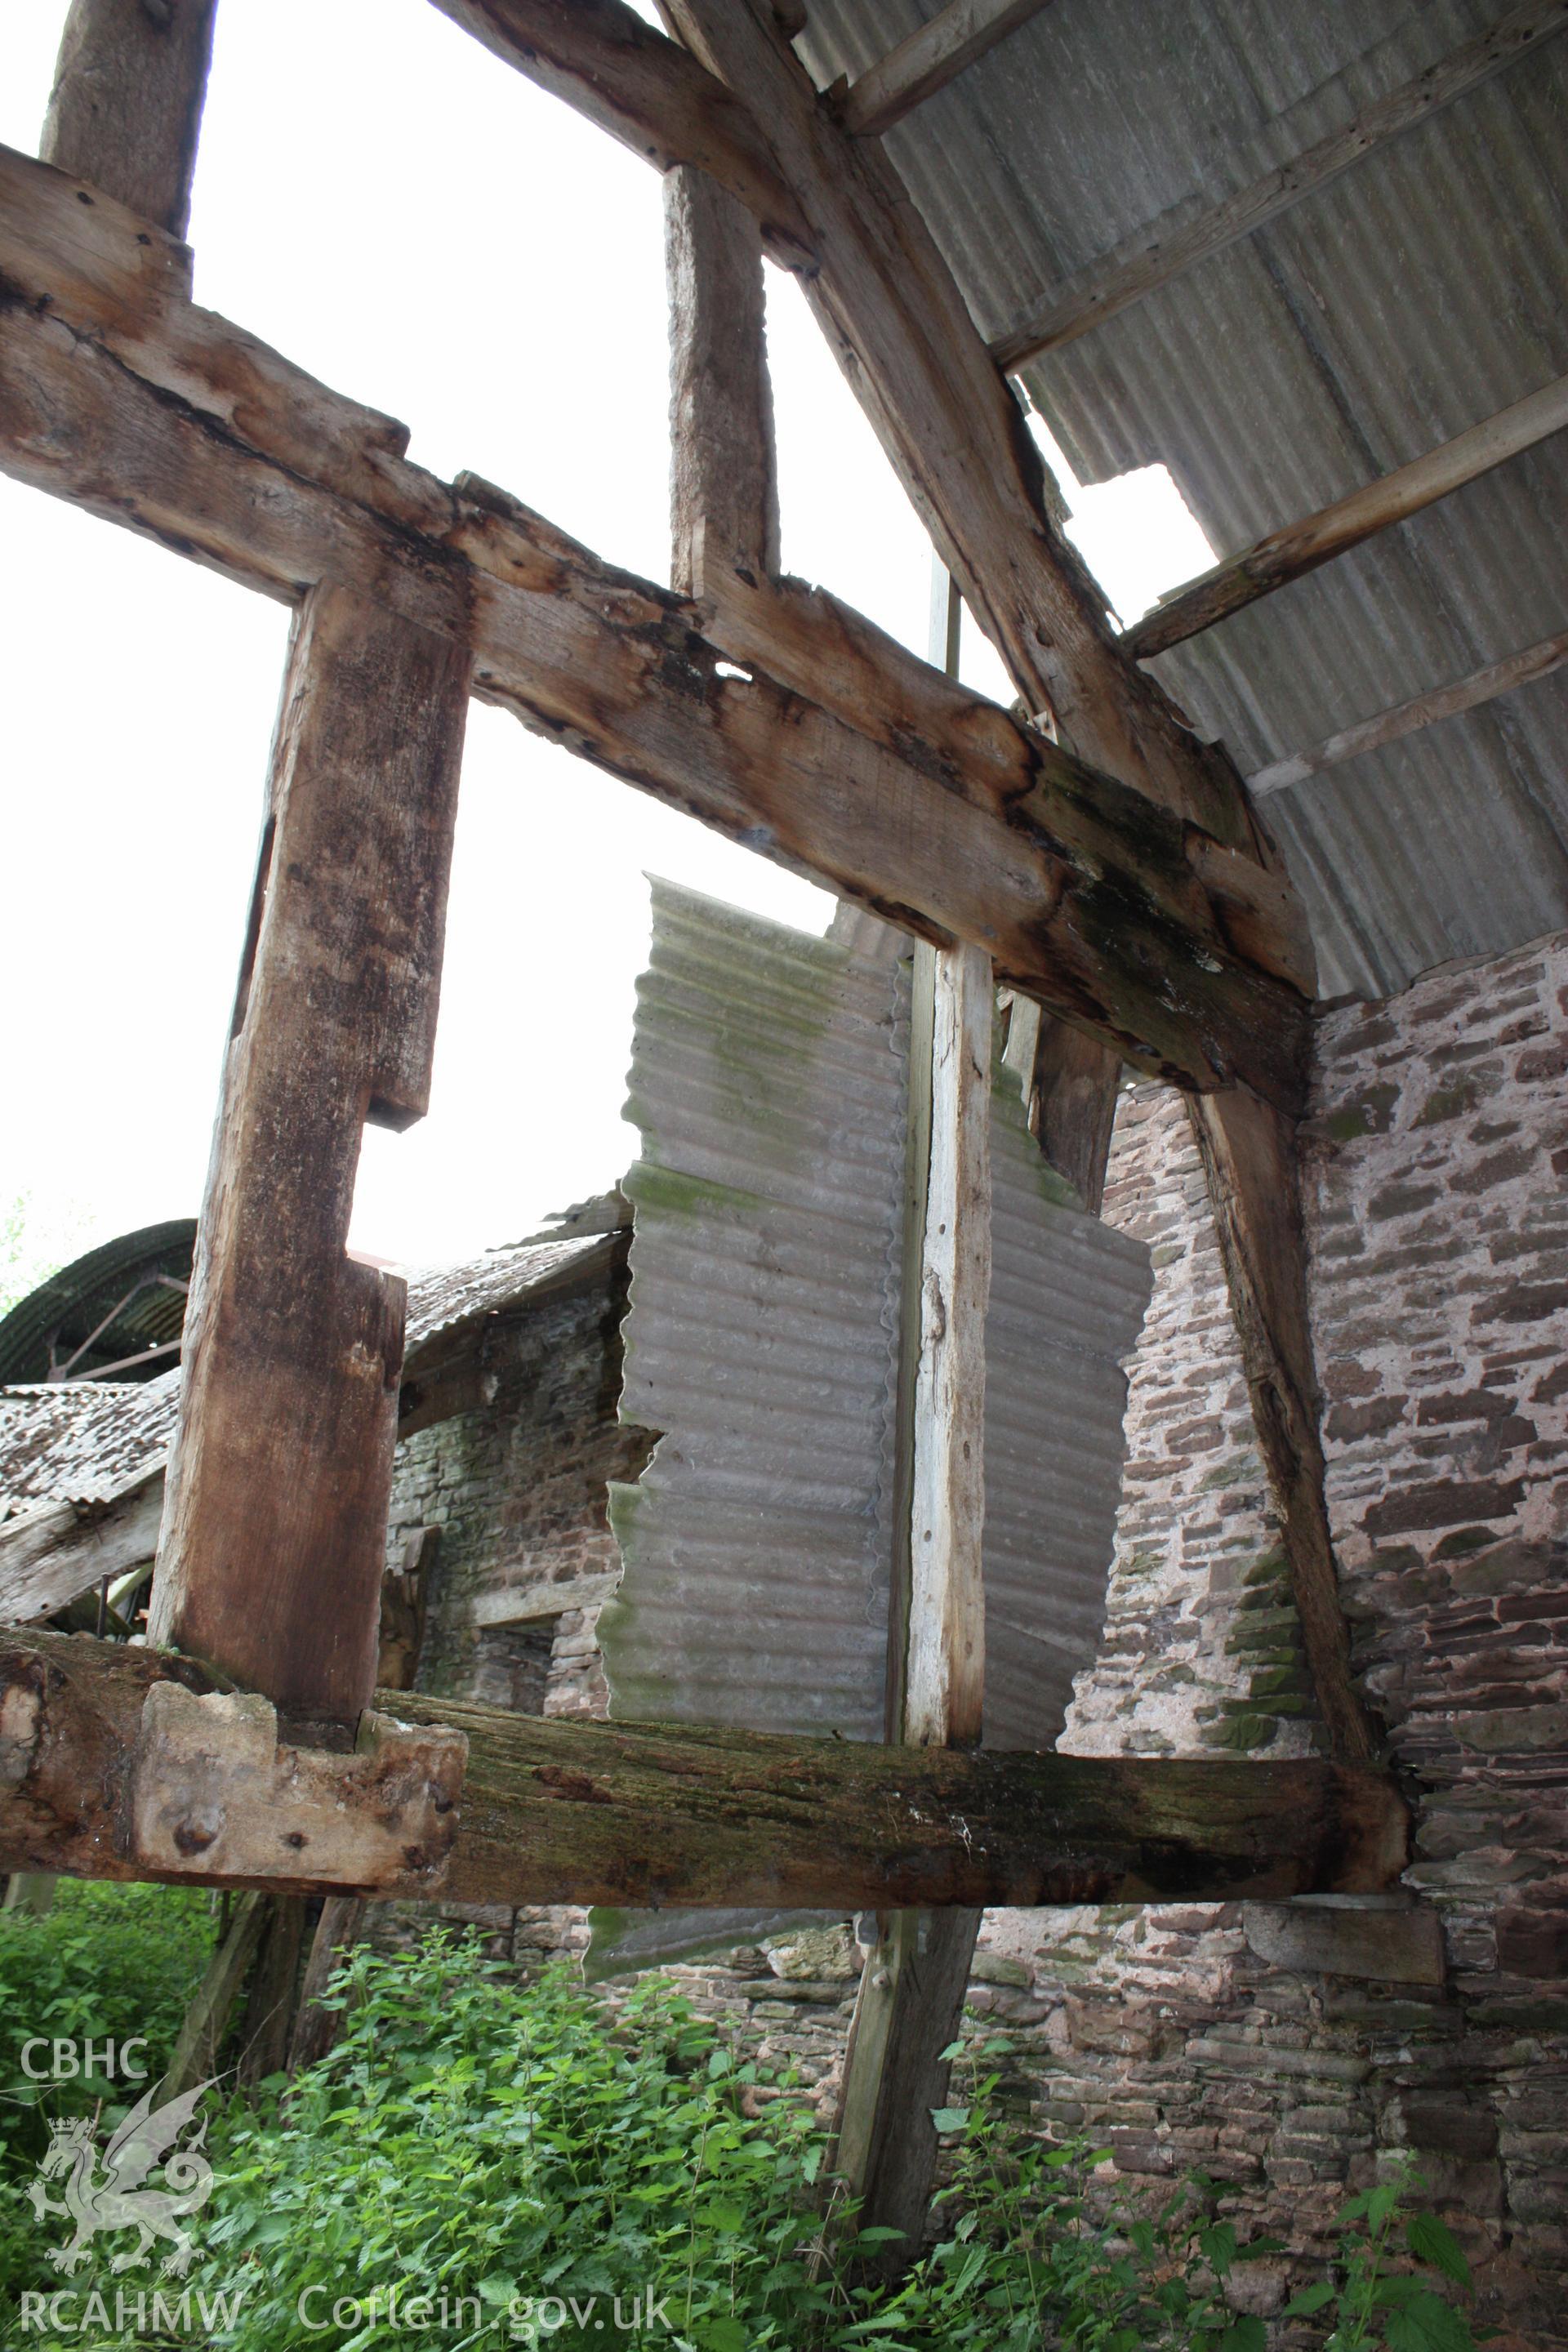 Interior of Barn range showing the lower end cruck truss.